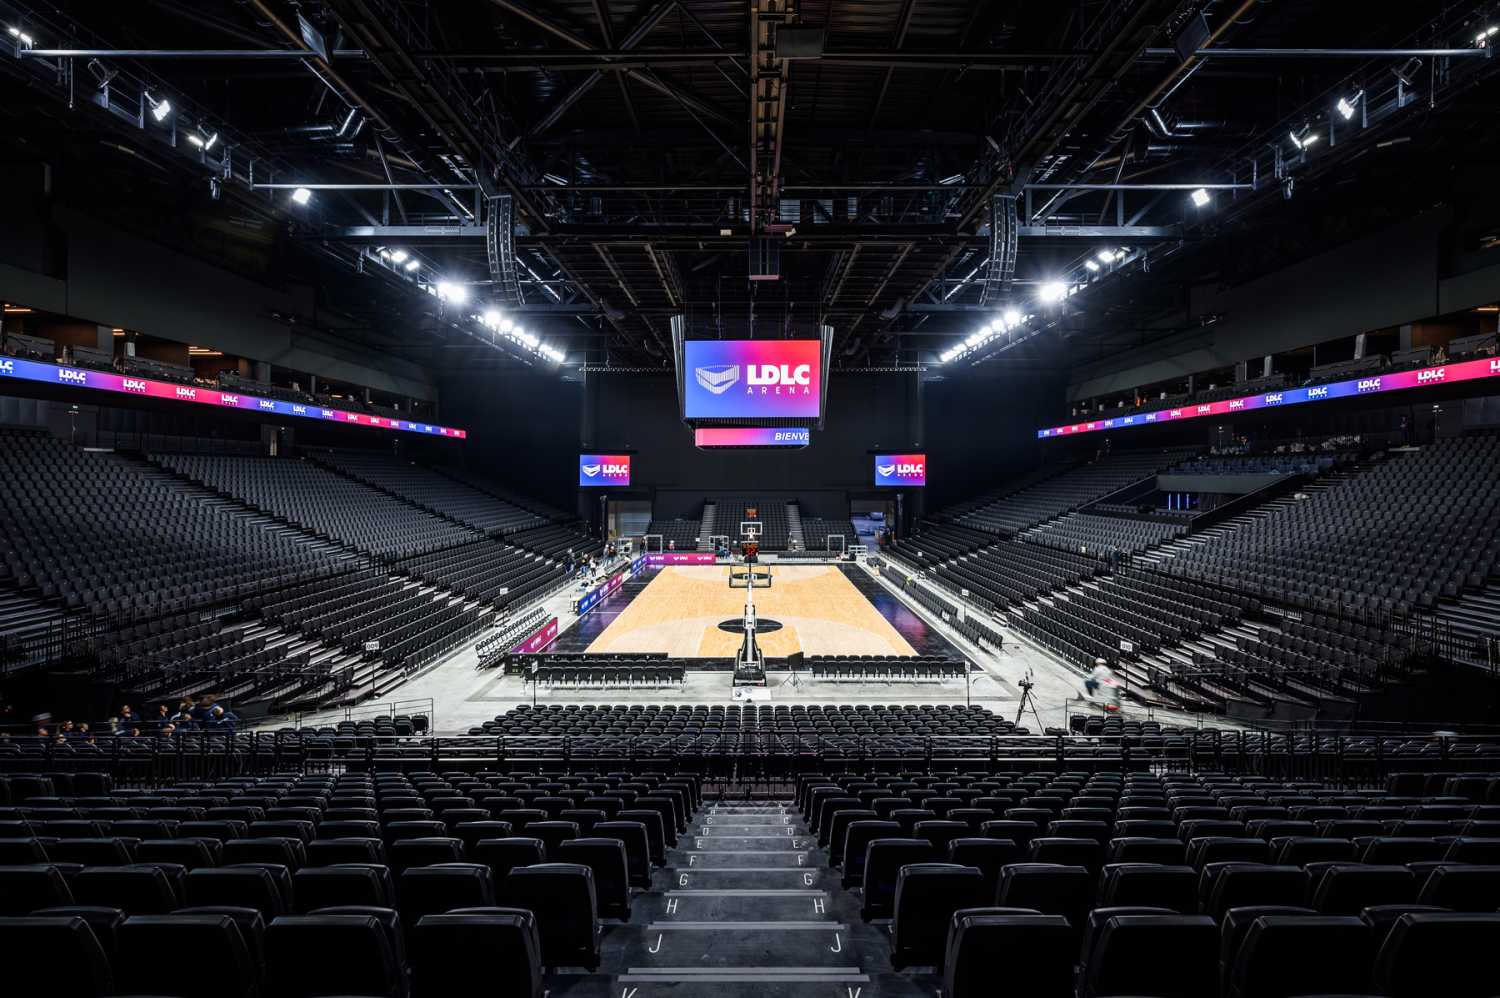 LDLC Arena will serve as home to Lyon-Villeurbanne’s ASVEL basketball team while accommodating exhibitions, and national and international tours